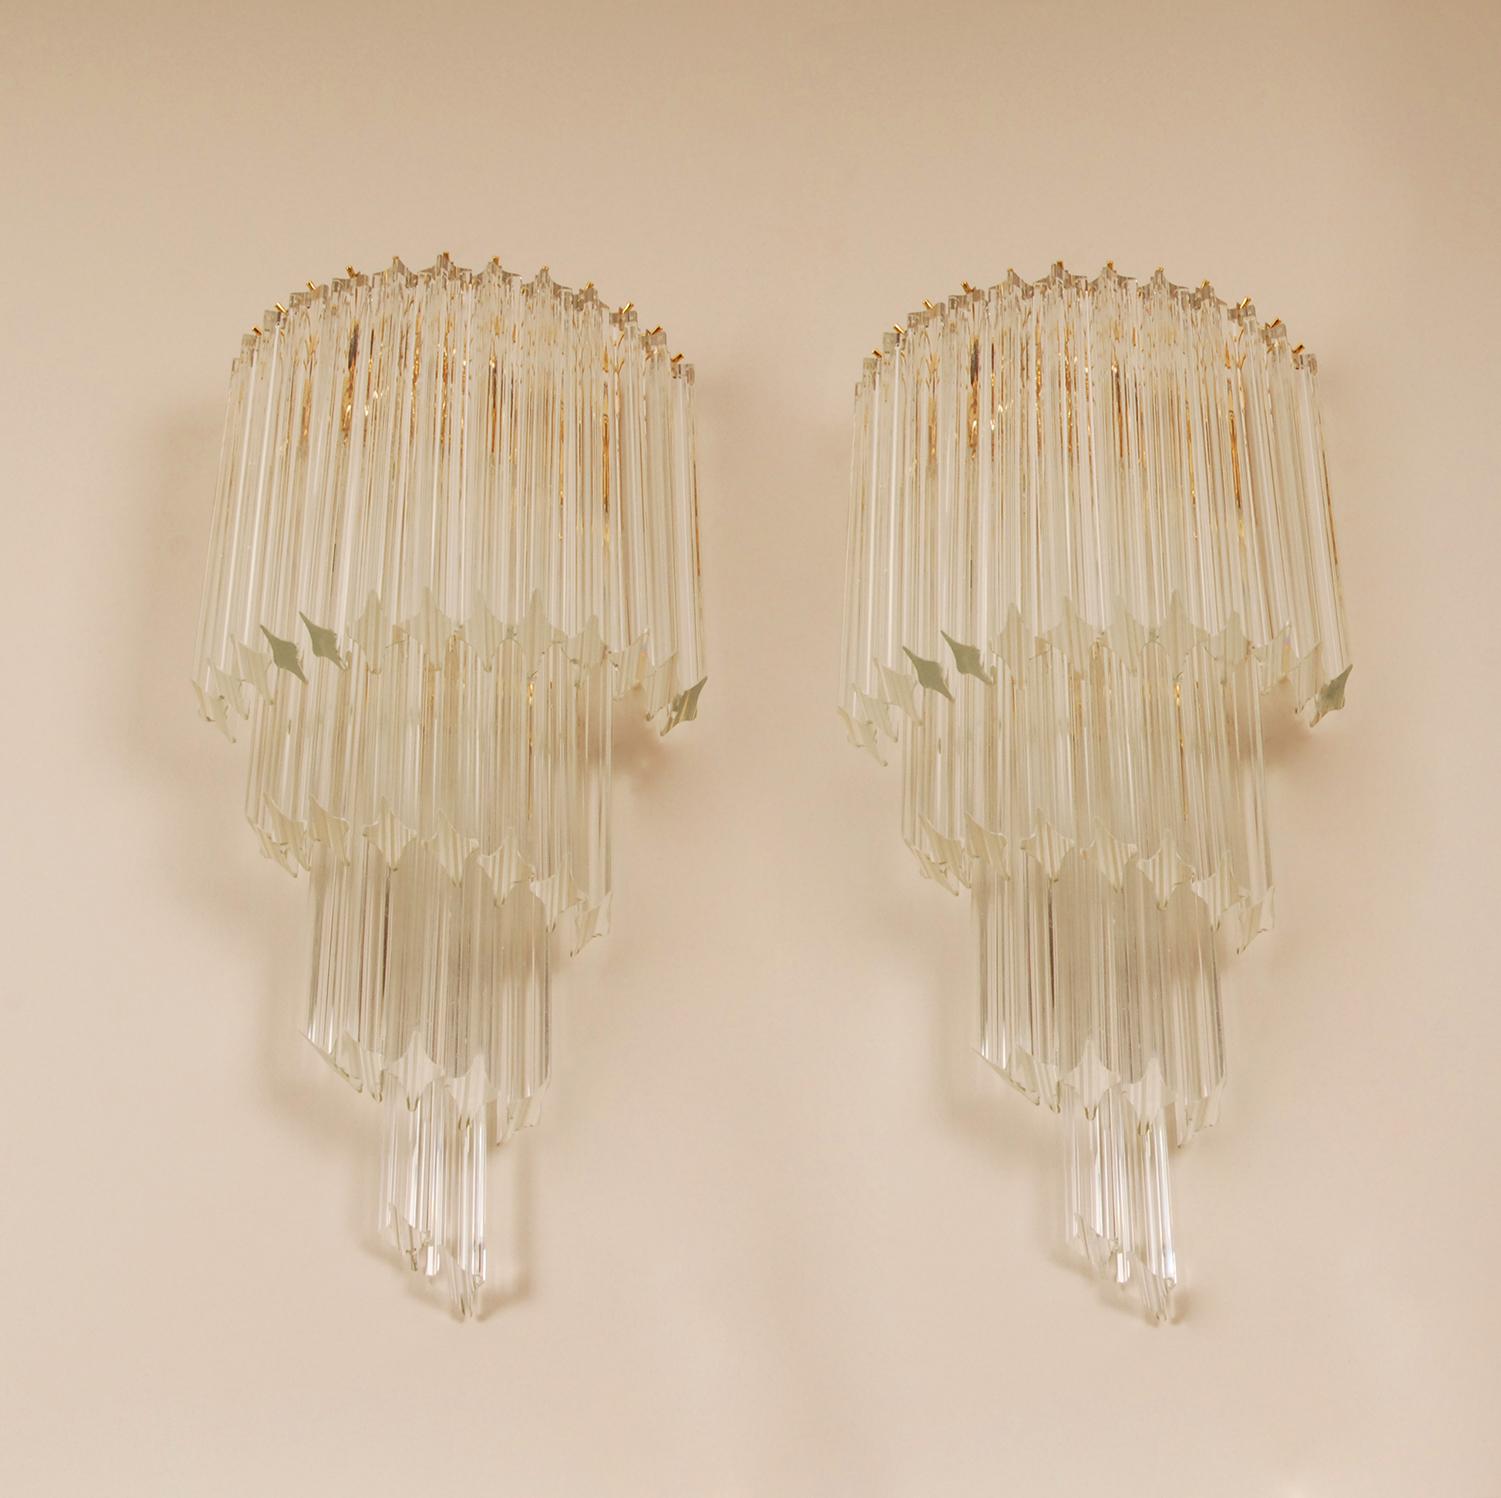 Gold Vintage Venini Spiral Wall Sconces 1960s Italian Murano Glass Wall Lamps  a pair